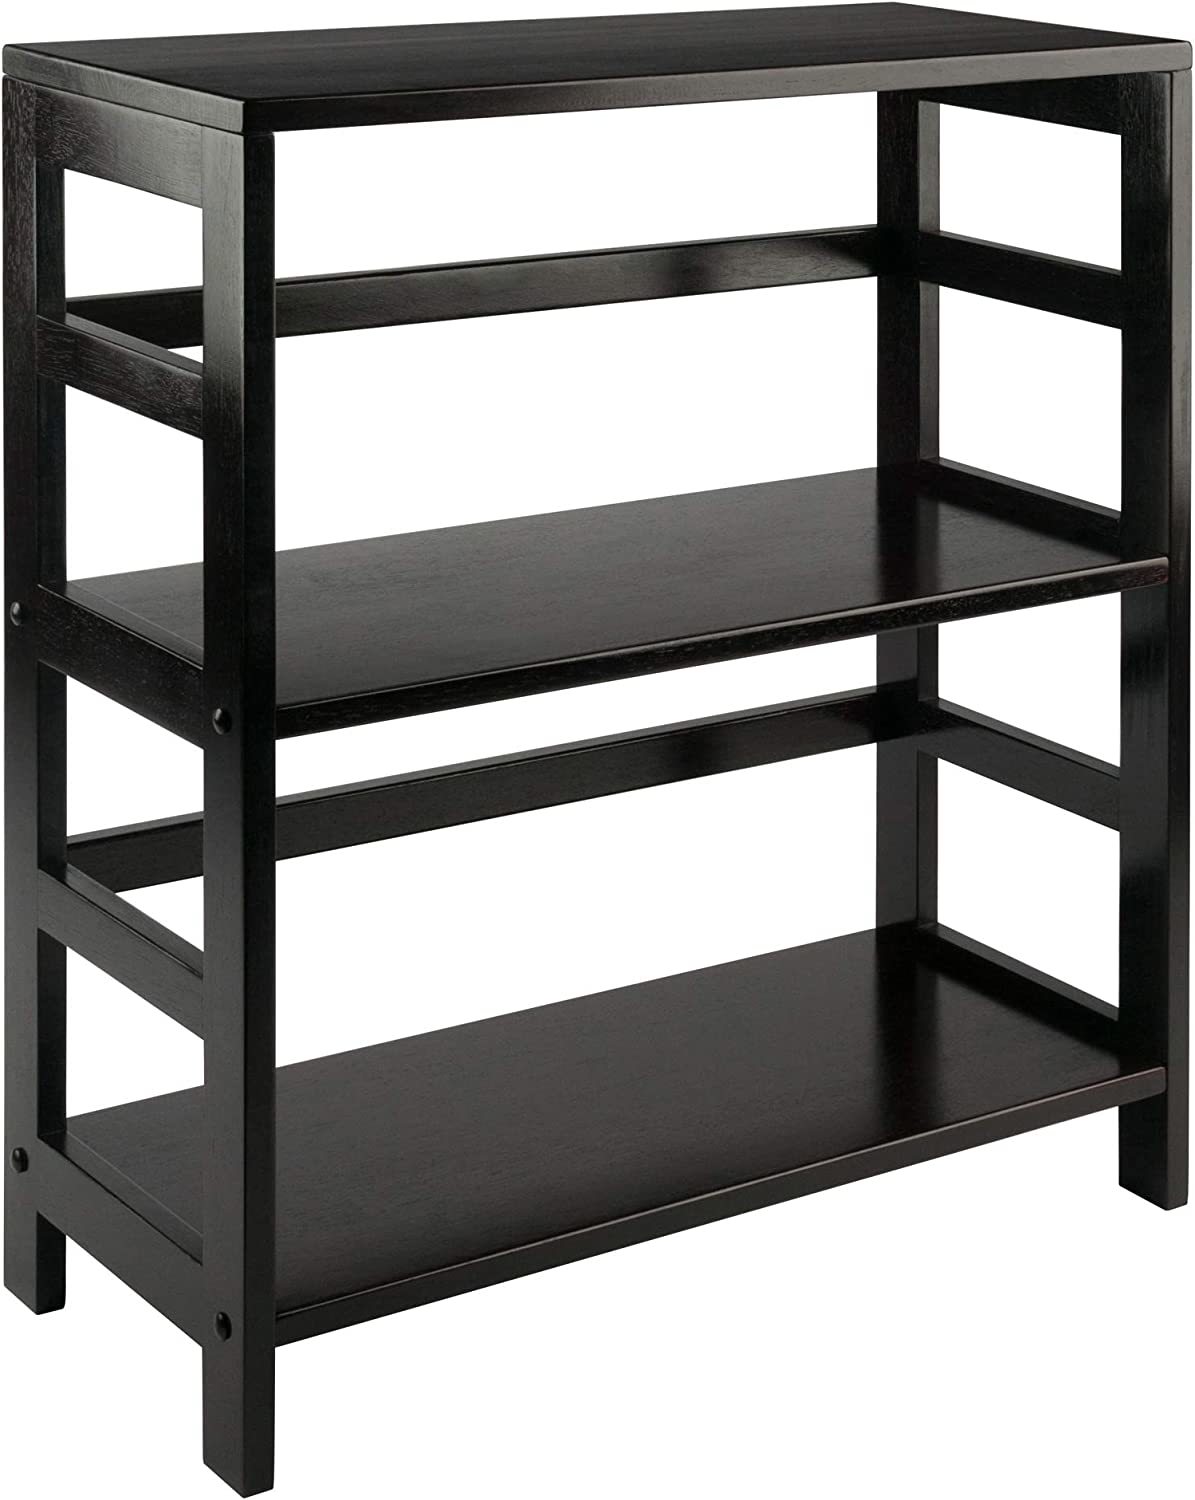 Shelving, Small And Large, Espresso, Winsome Wood Leo Model. - $64.92